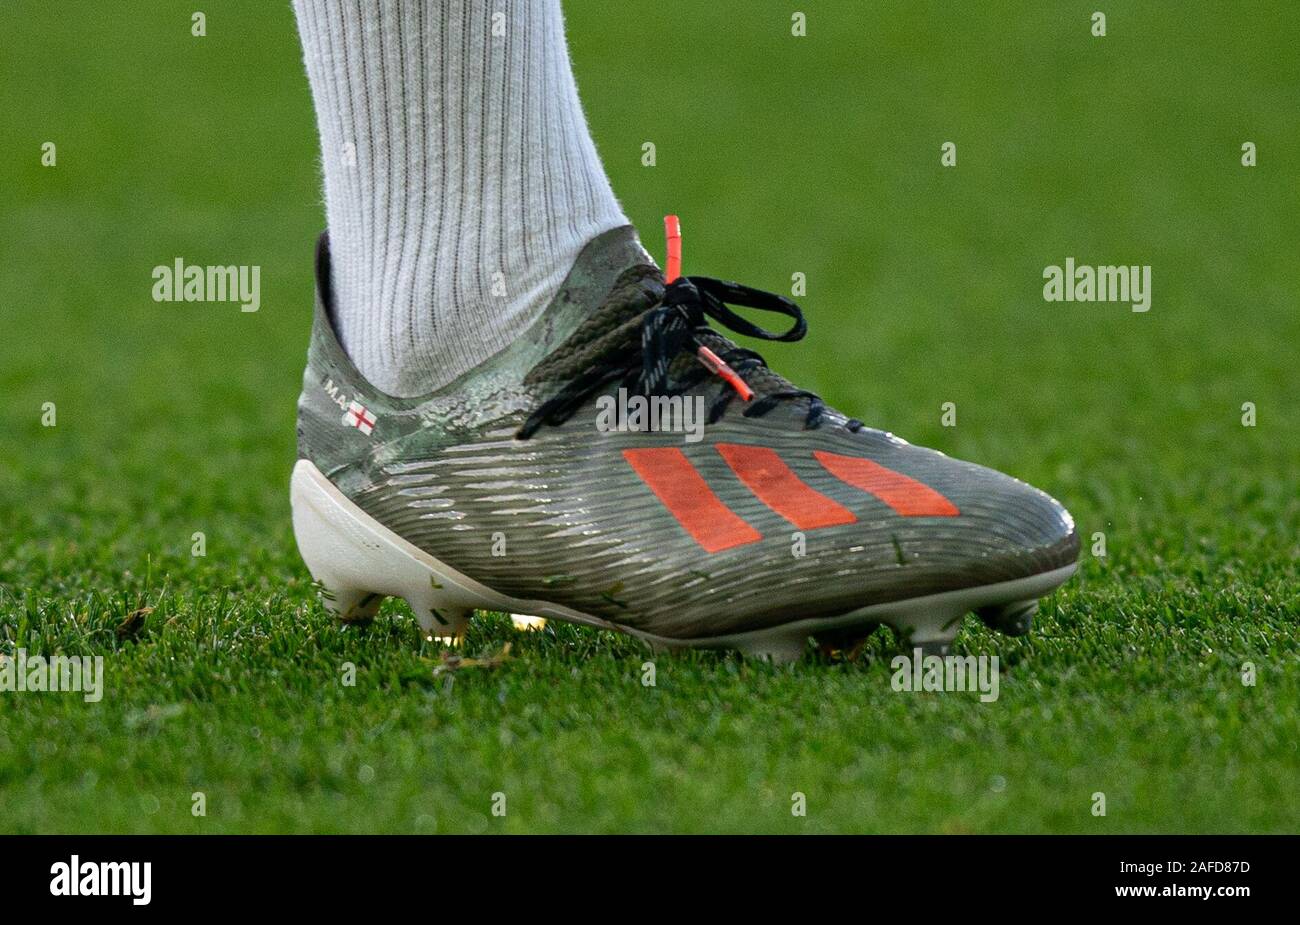 Adidas X High Resolution Stock Photography and Images - Alamy